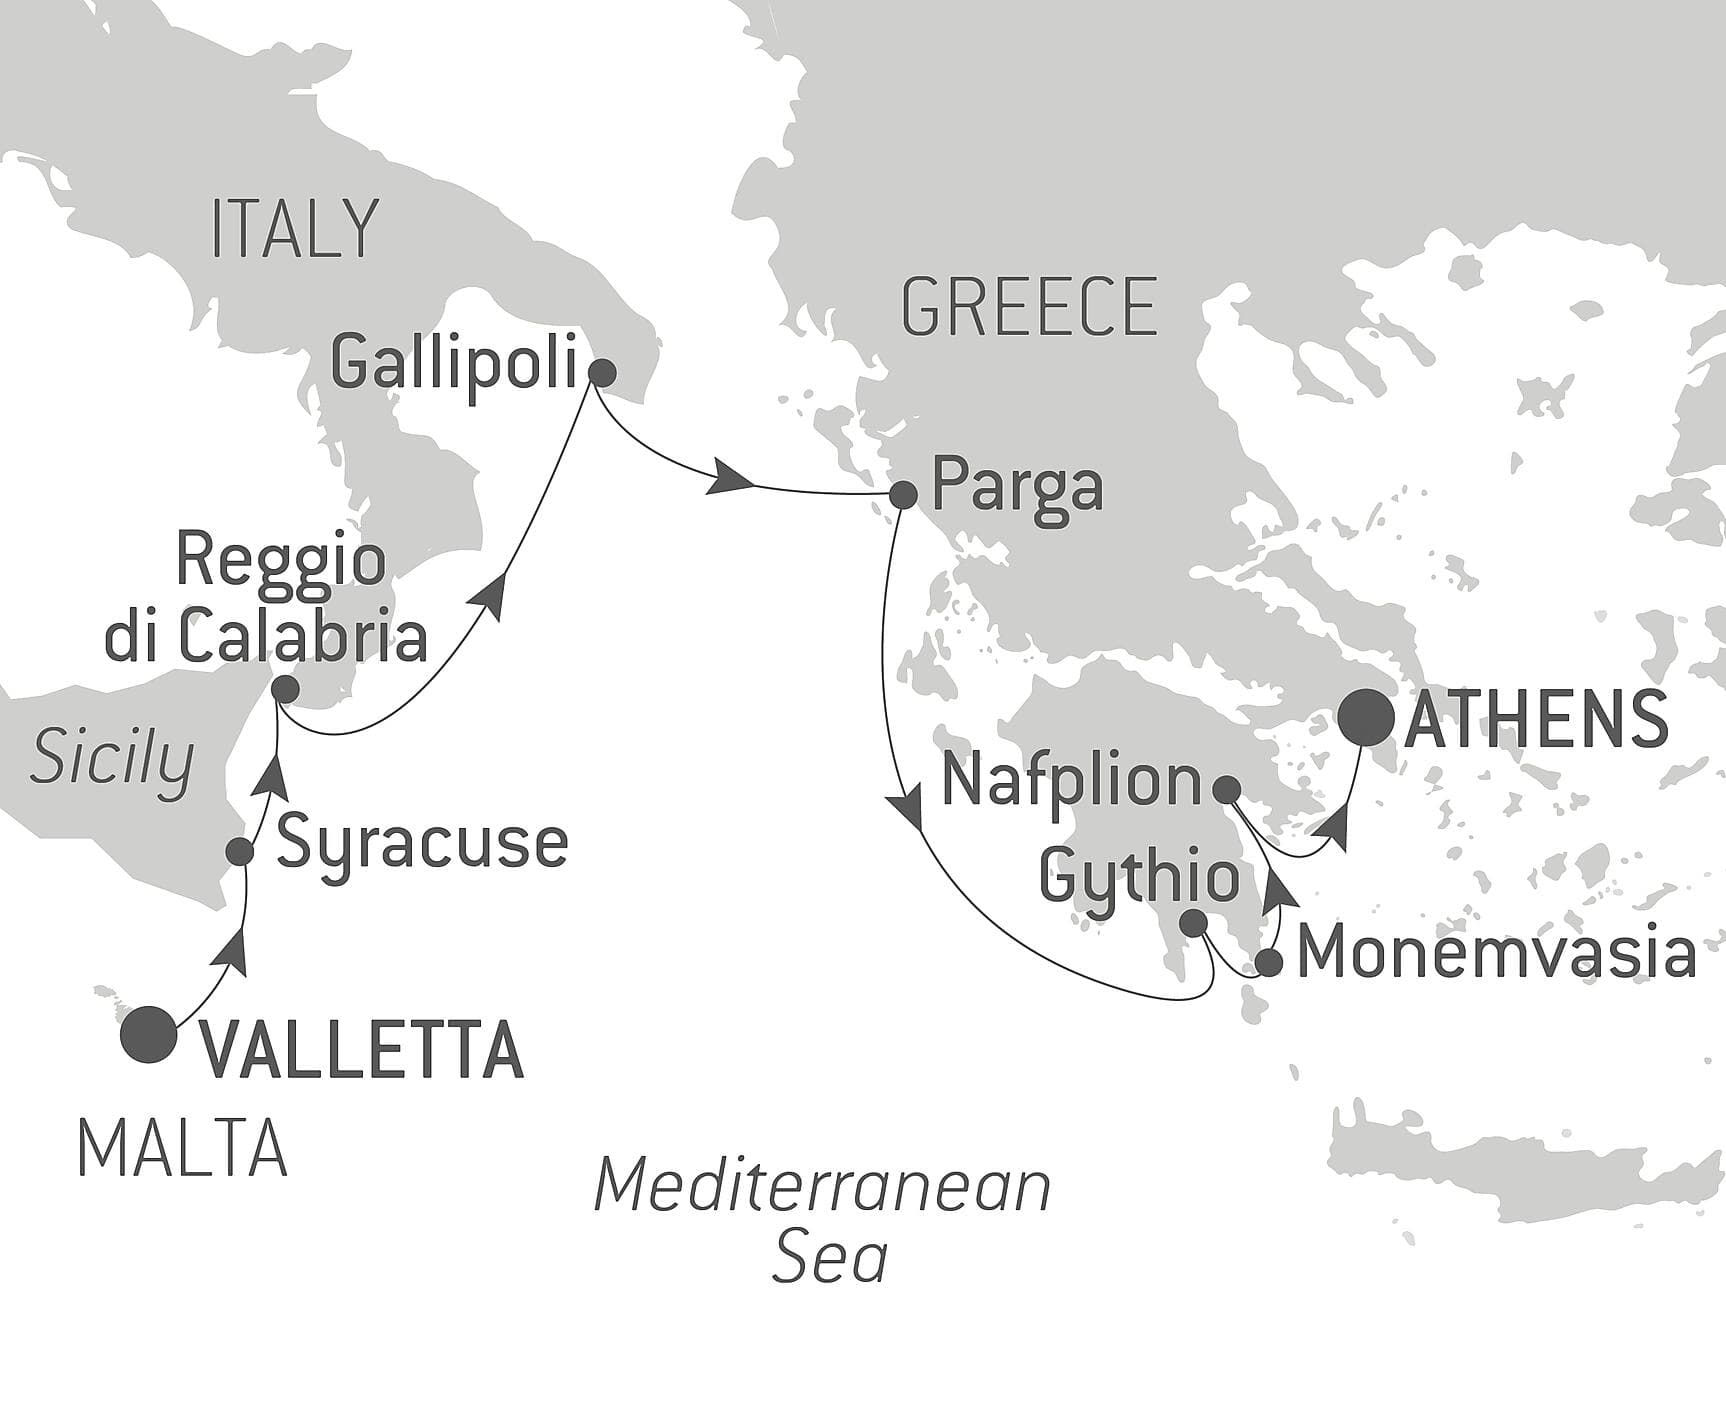 Historical cities of the Mediterranean